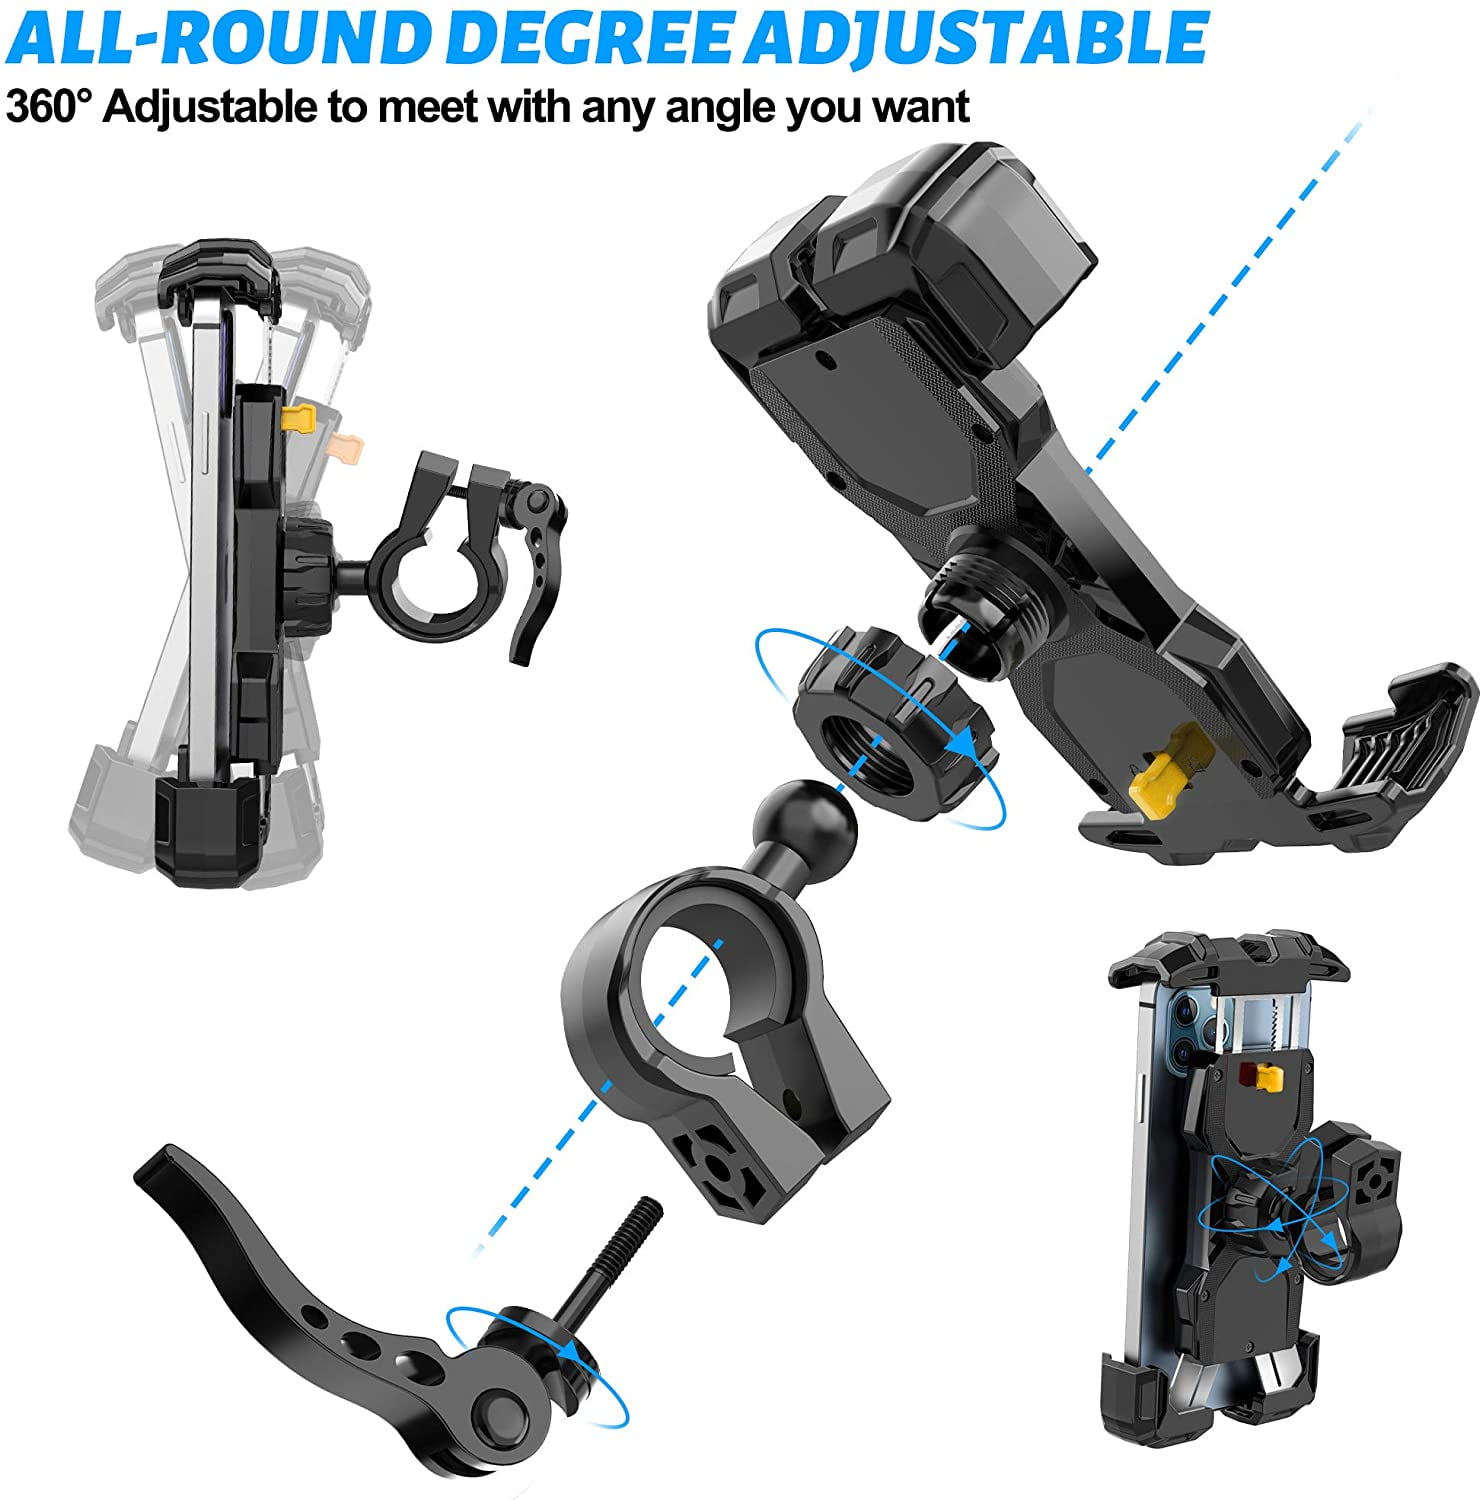 All-Round Adjustble Motorcycle Phone Mount Bike Phone Mount Bike Phone Holder for Handlebars Fits iPhone 12 Pro Max/11 Pro/XR/XS MAX,Galaxy S20/S10/Note 10 and All 4.7-6.8inches Devices 